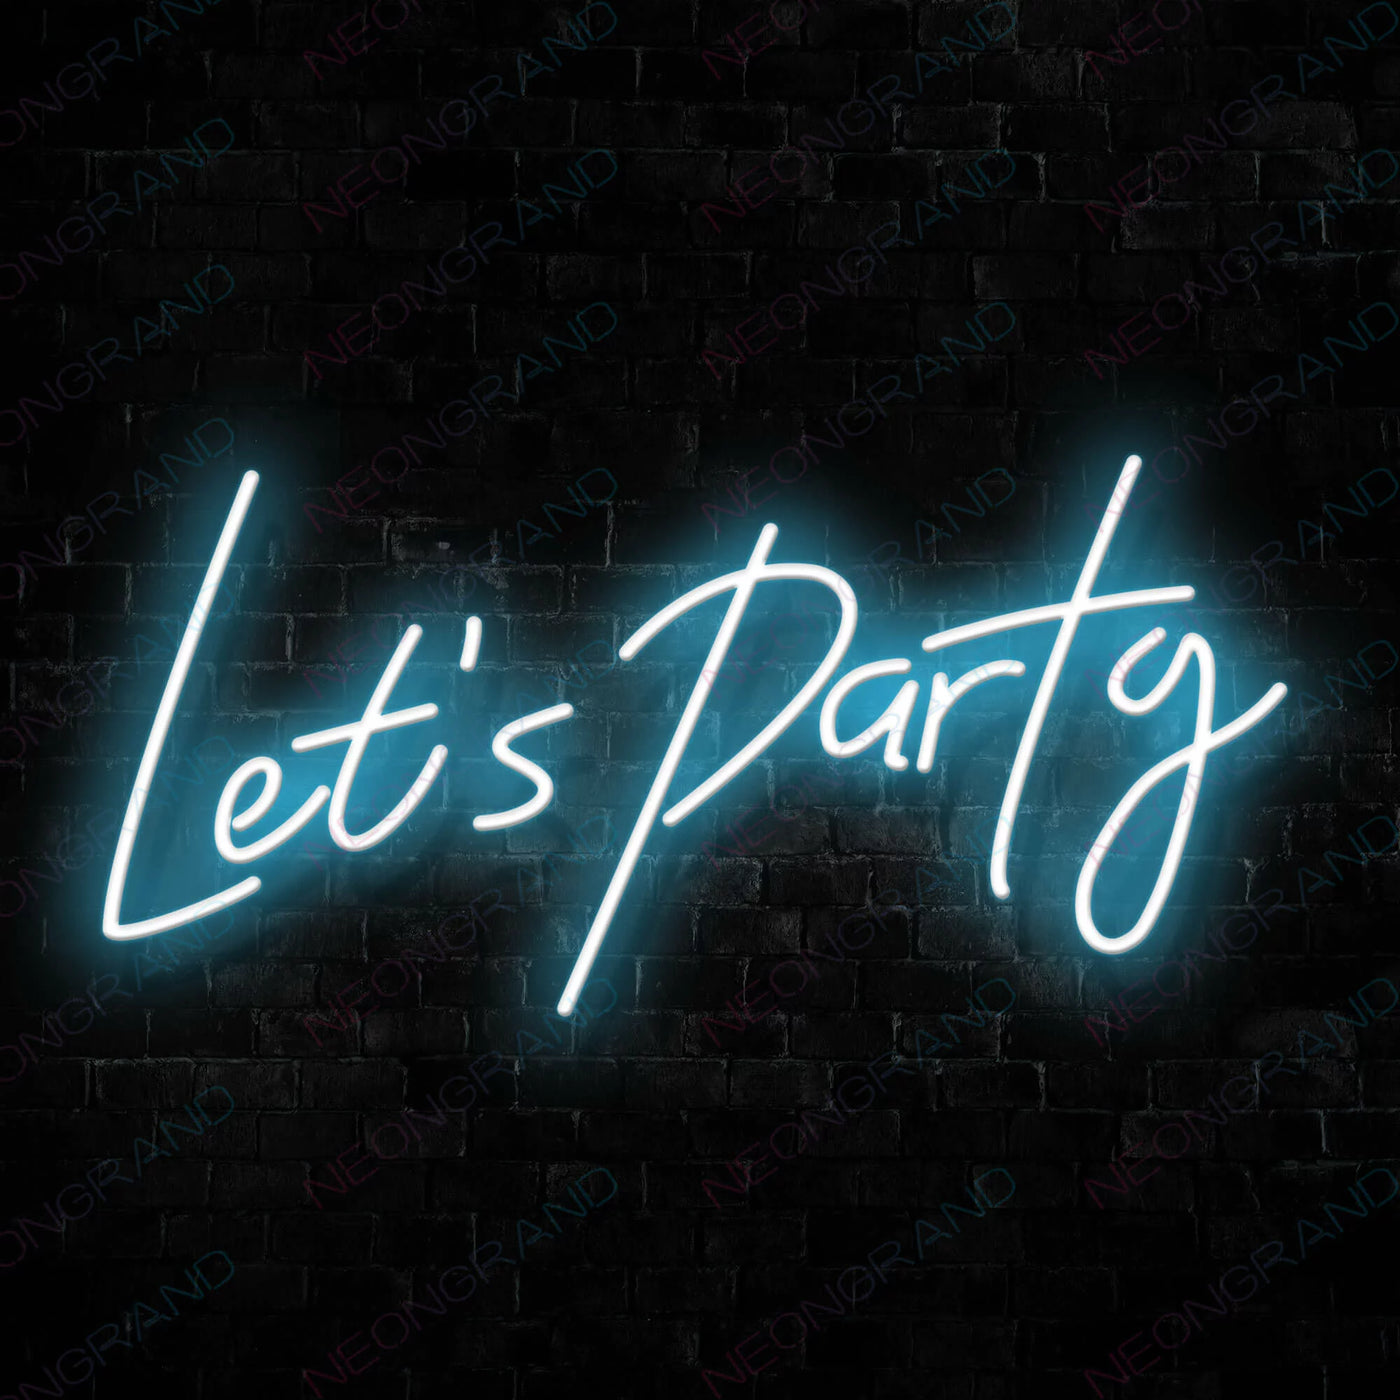 Let's Party Neon Sign Led Light SkyBlue